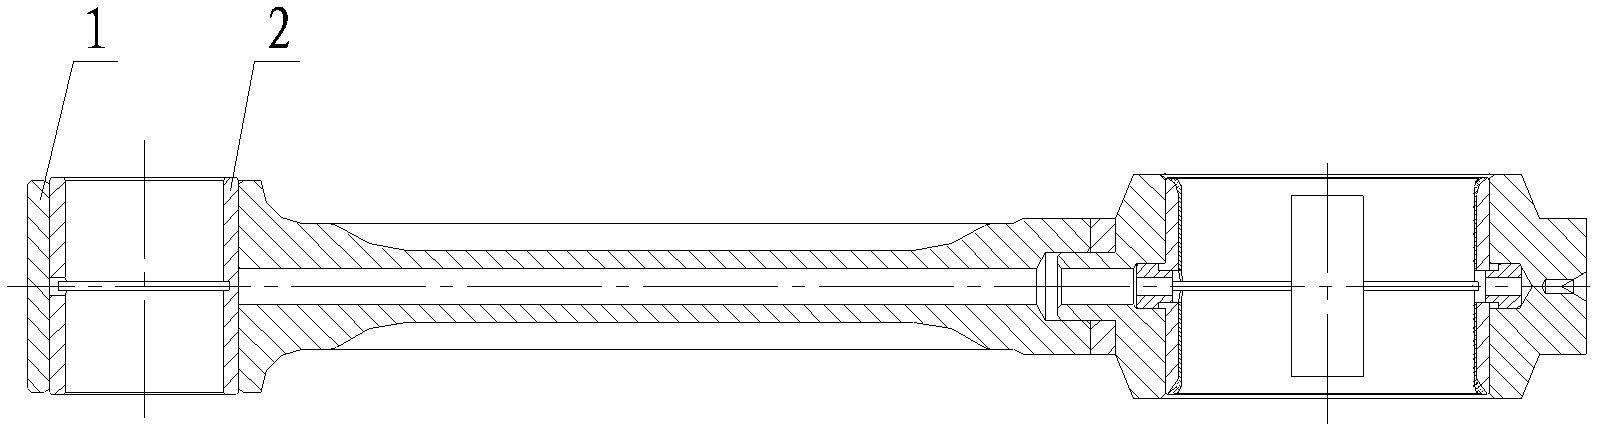 Fixed-position welding process for casting titanium alloy connecting rod